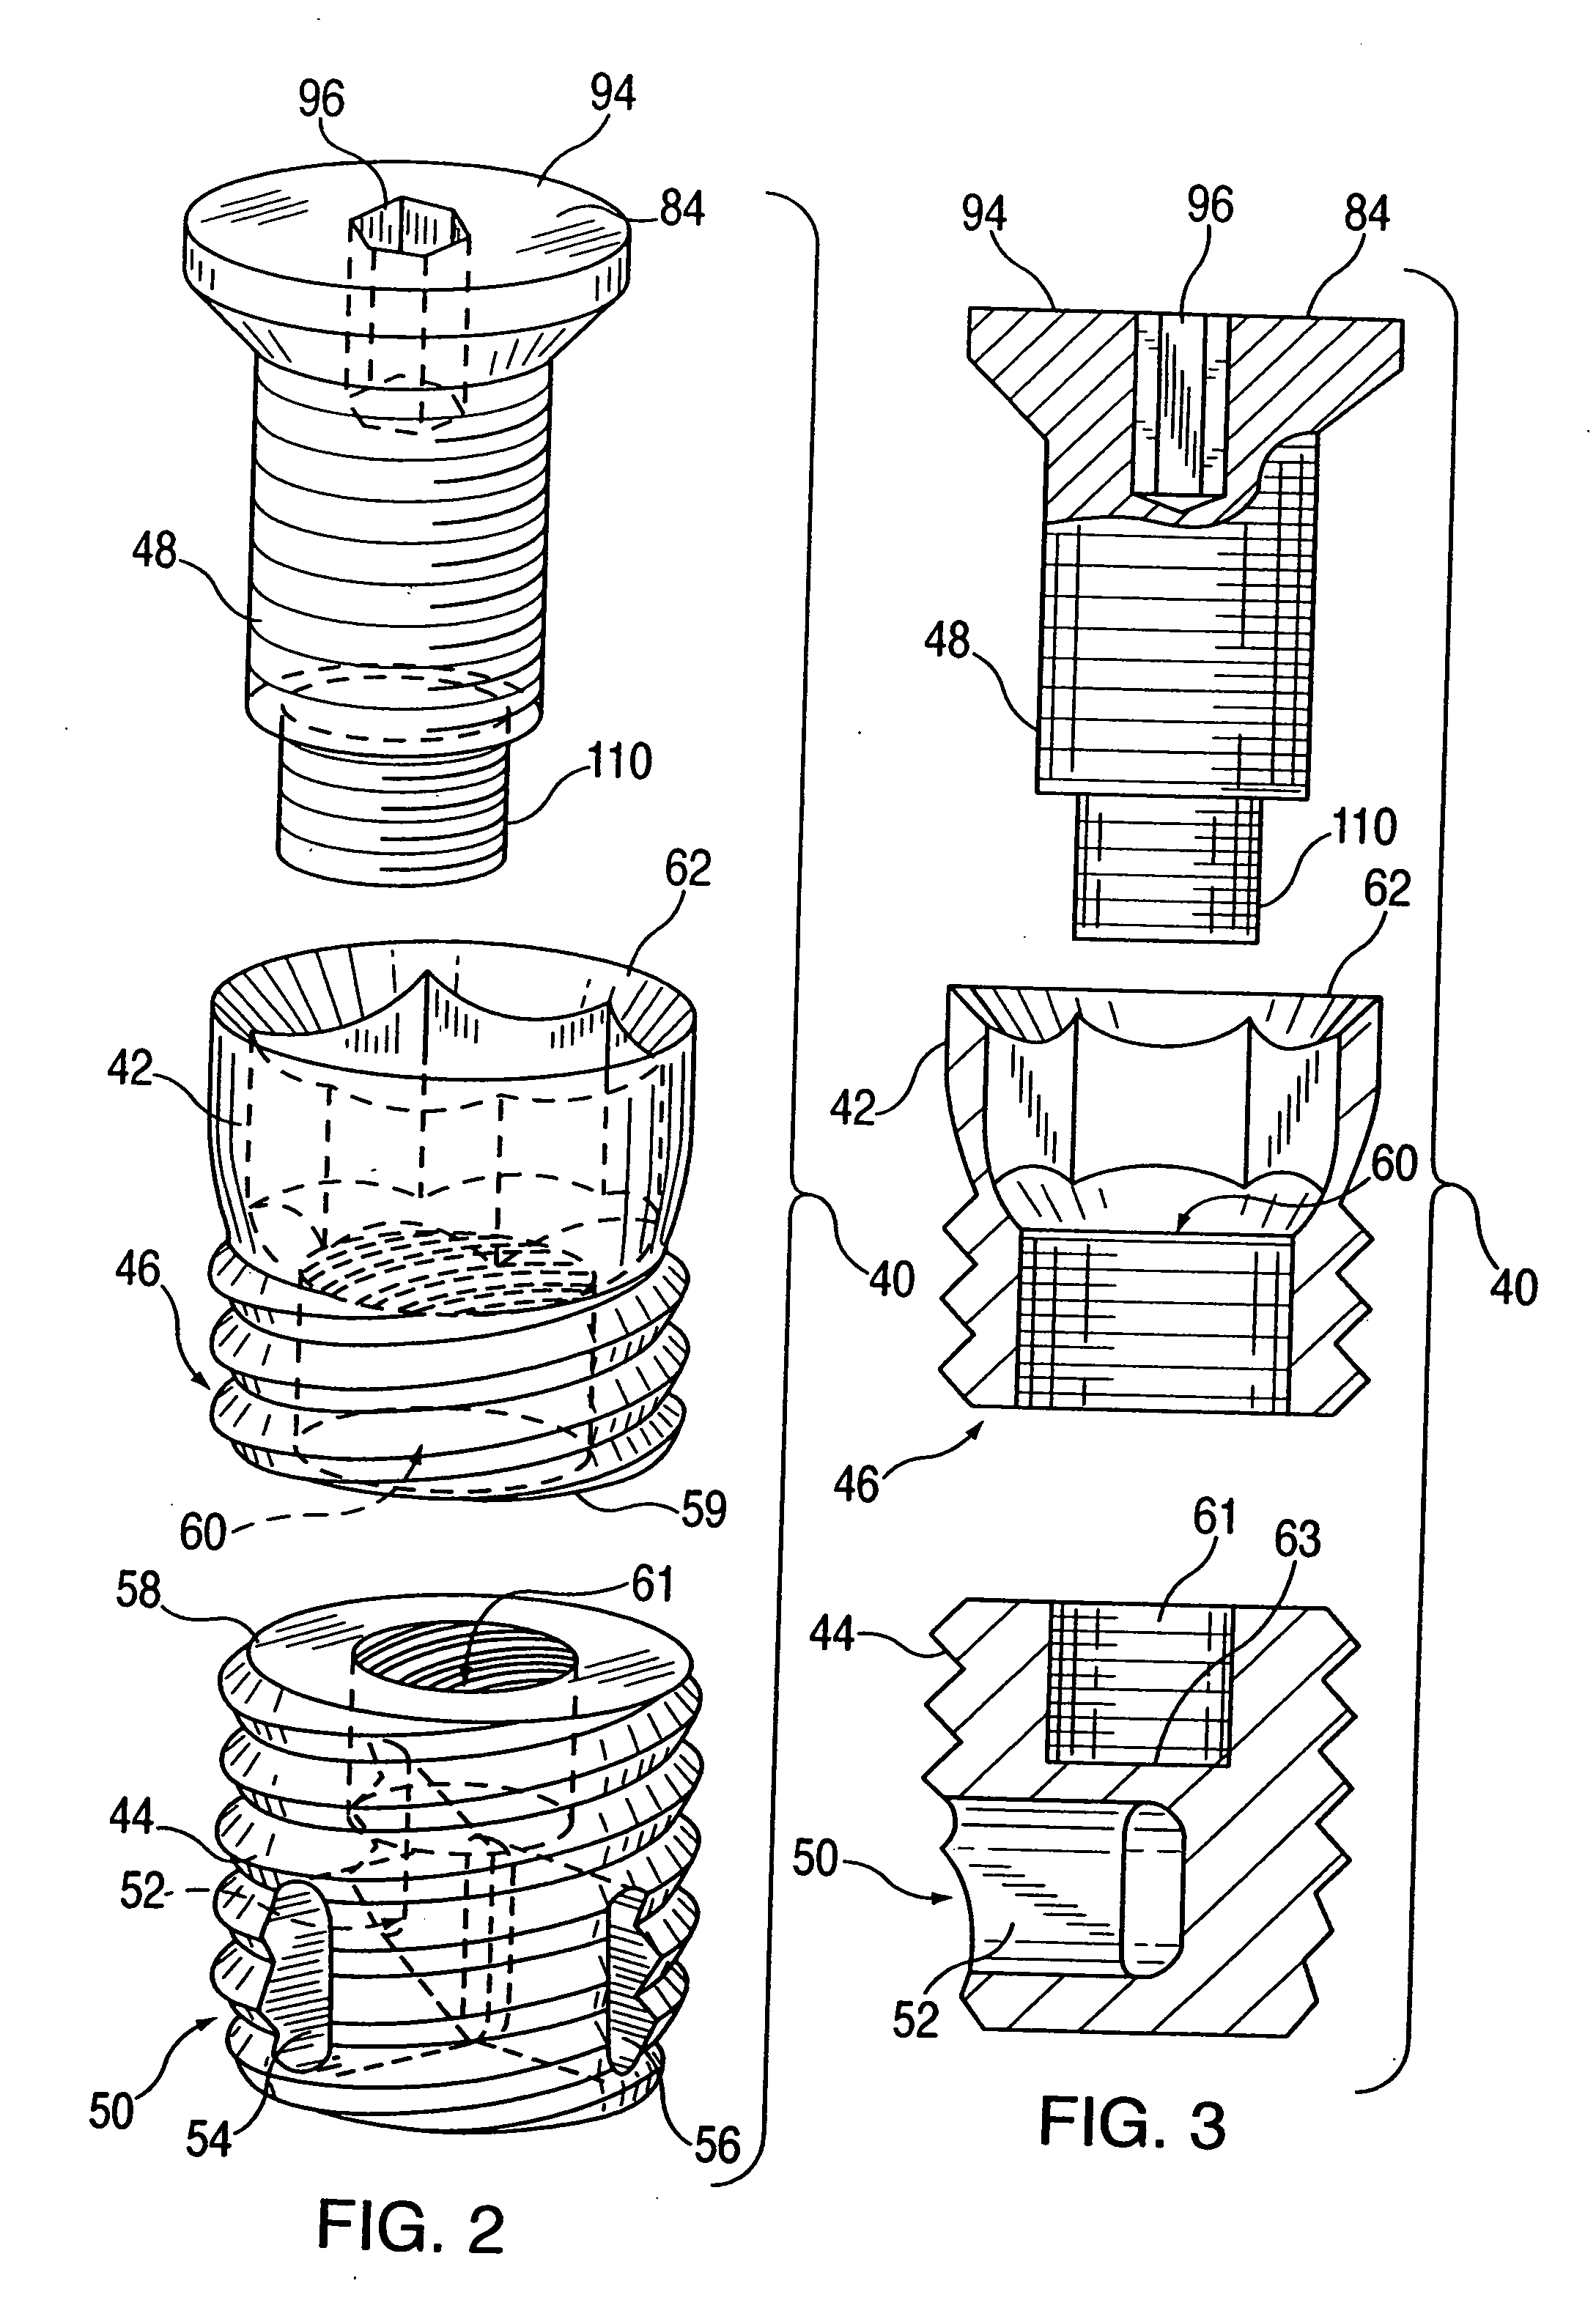 Combination distraction dental implant and method of use